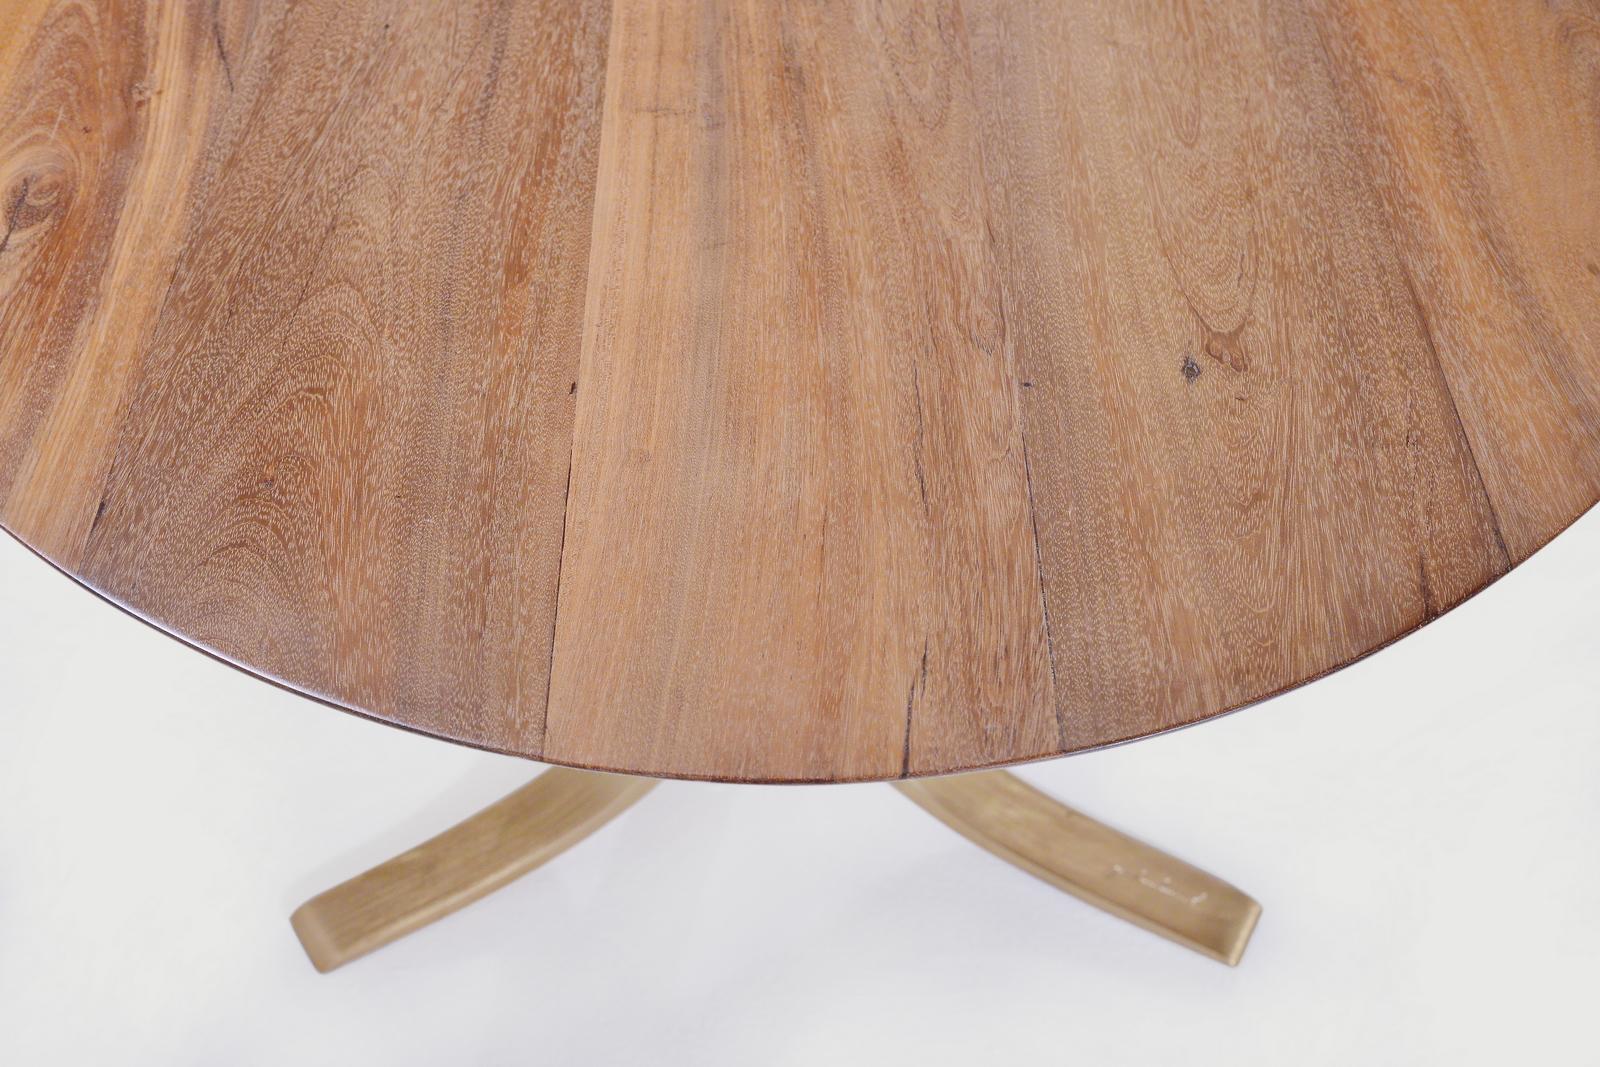 Bespoke Oval Table, Reclaimed Hardwood with Brass Base, by P. Tendercool For Sale 1